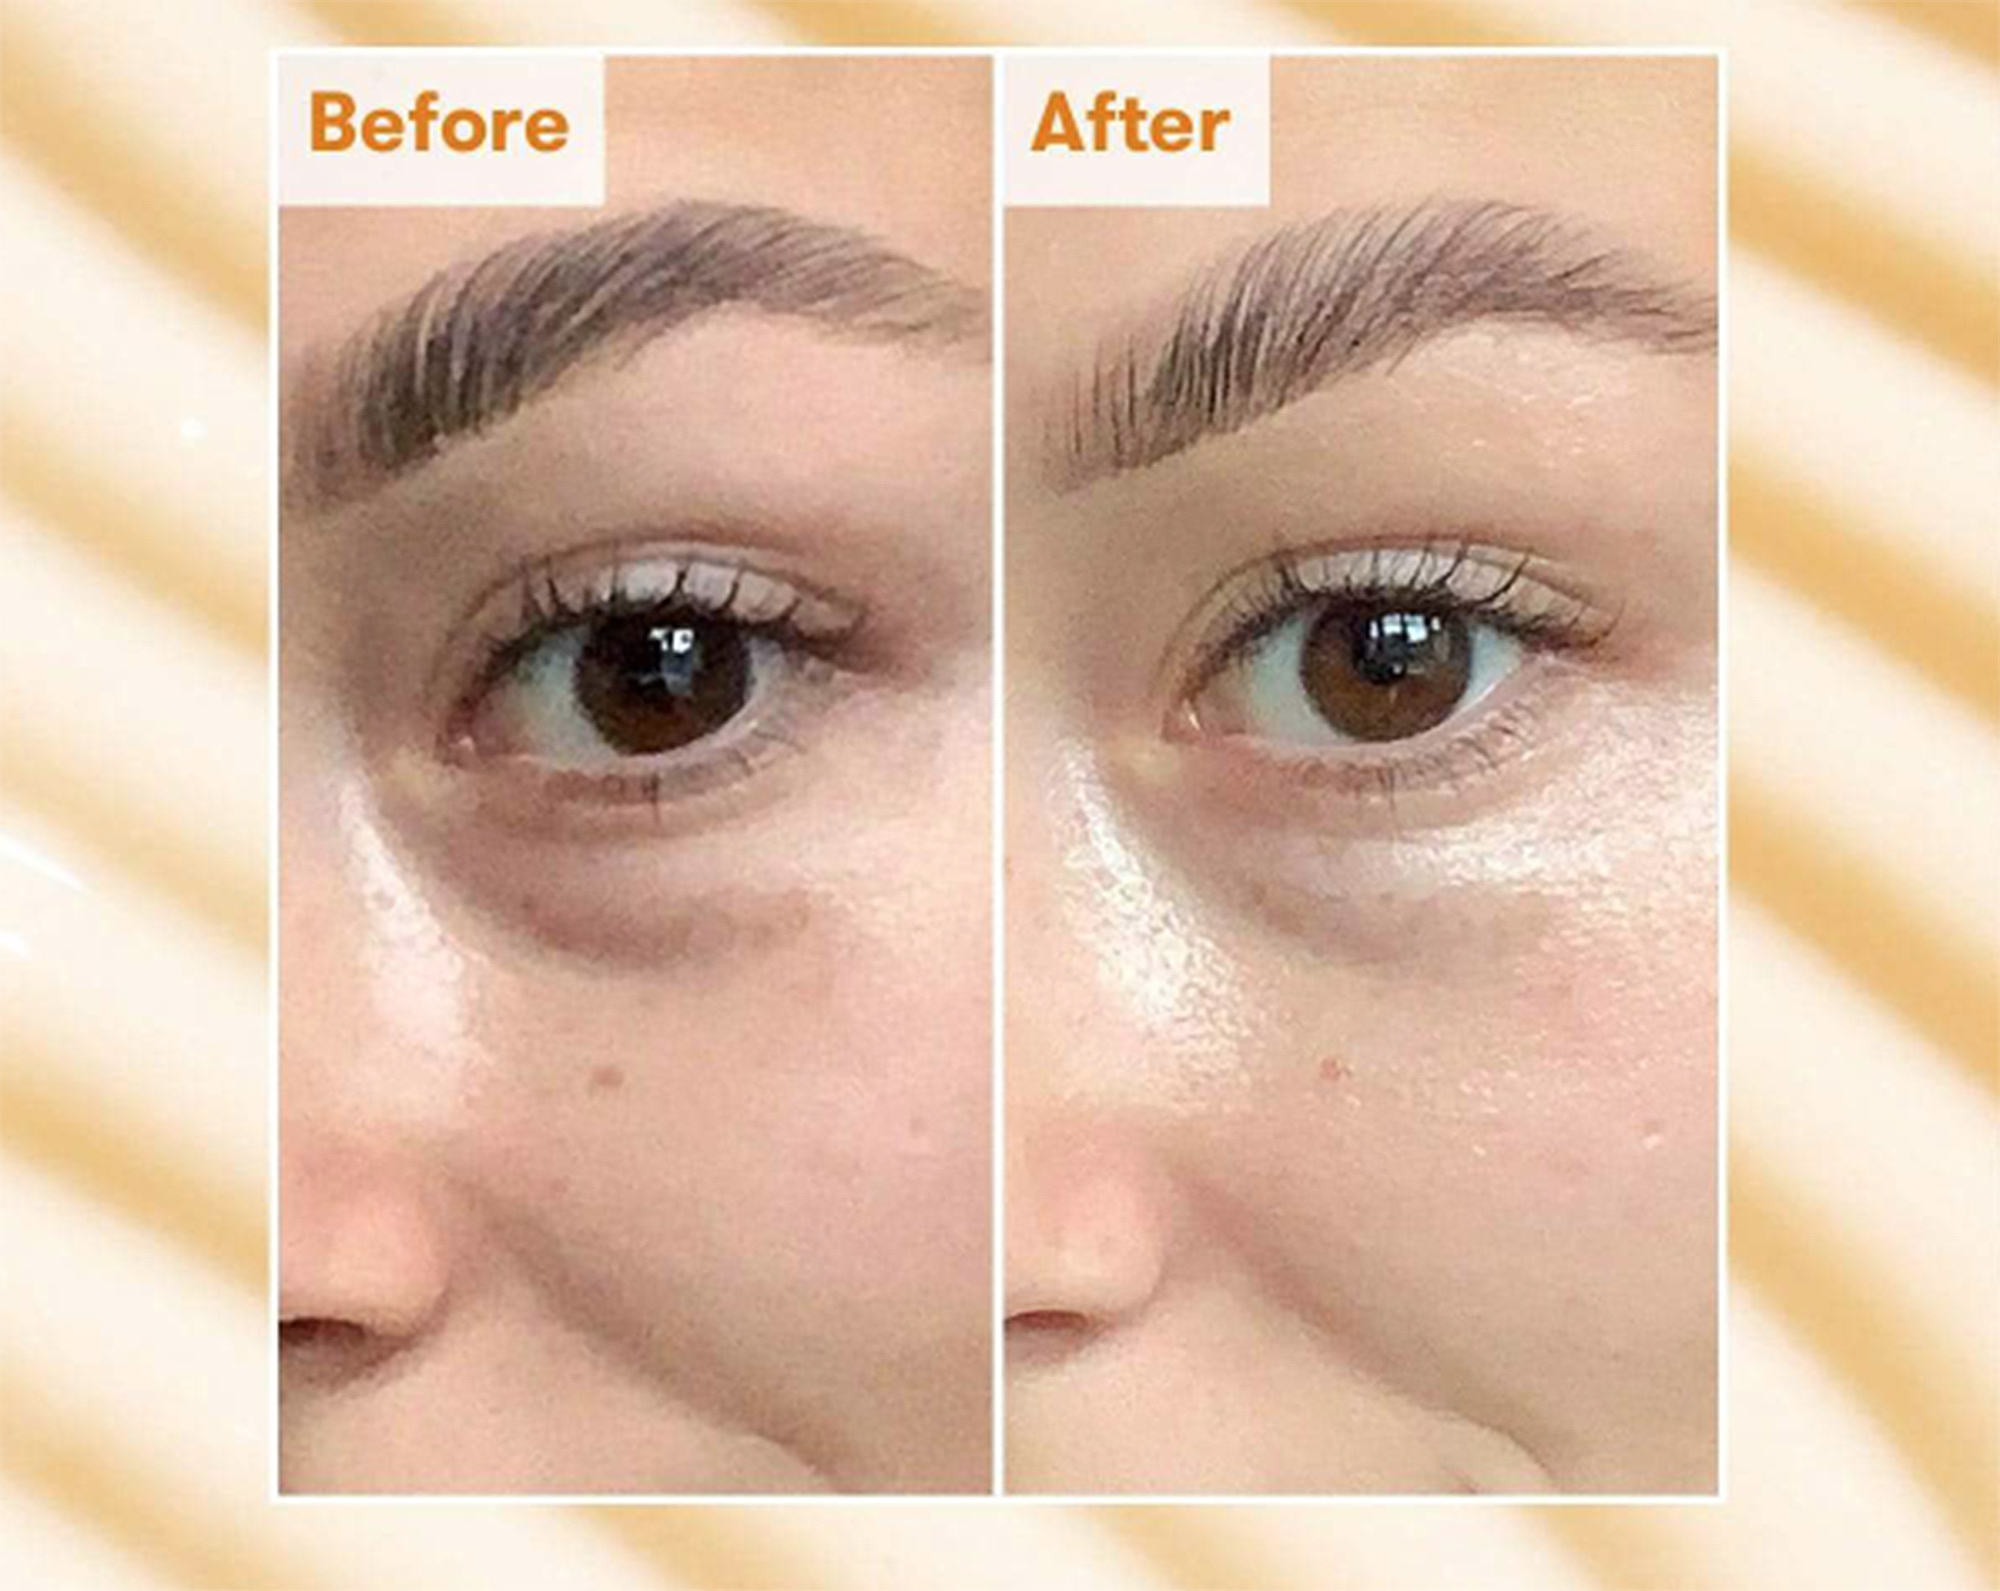 REN Eye Cream Could Visibly Reduce Dark Circles in Just 7 Days